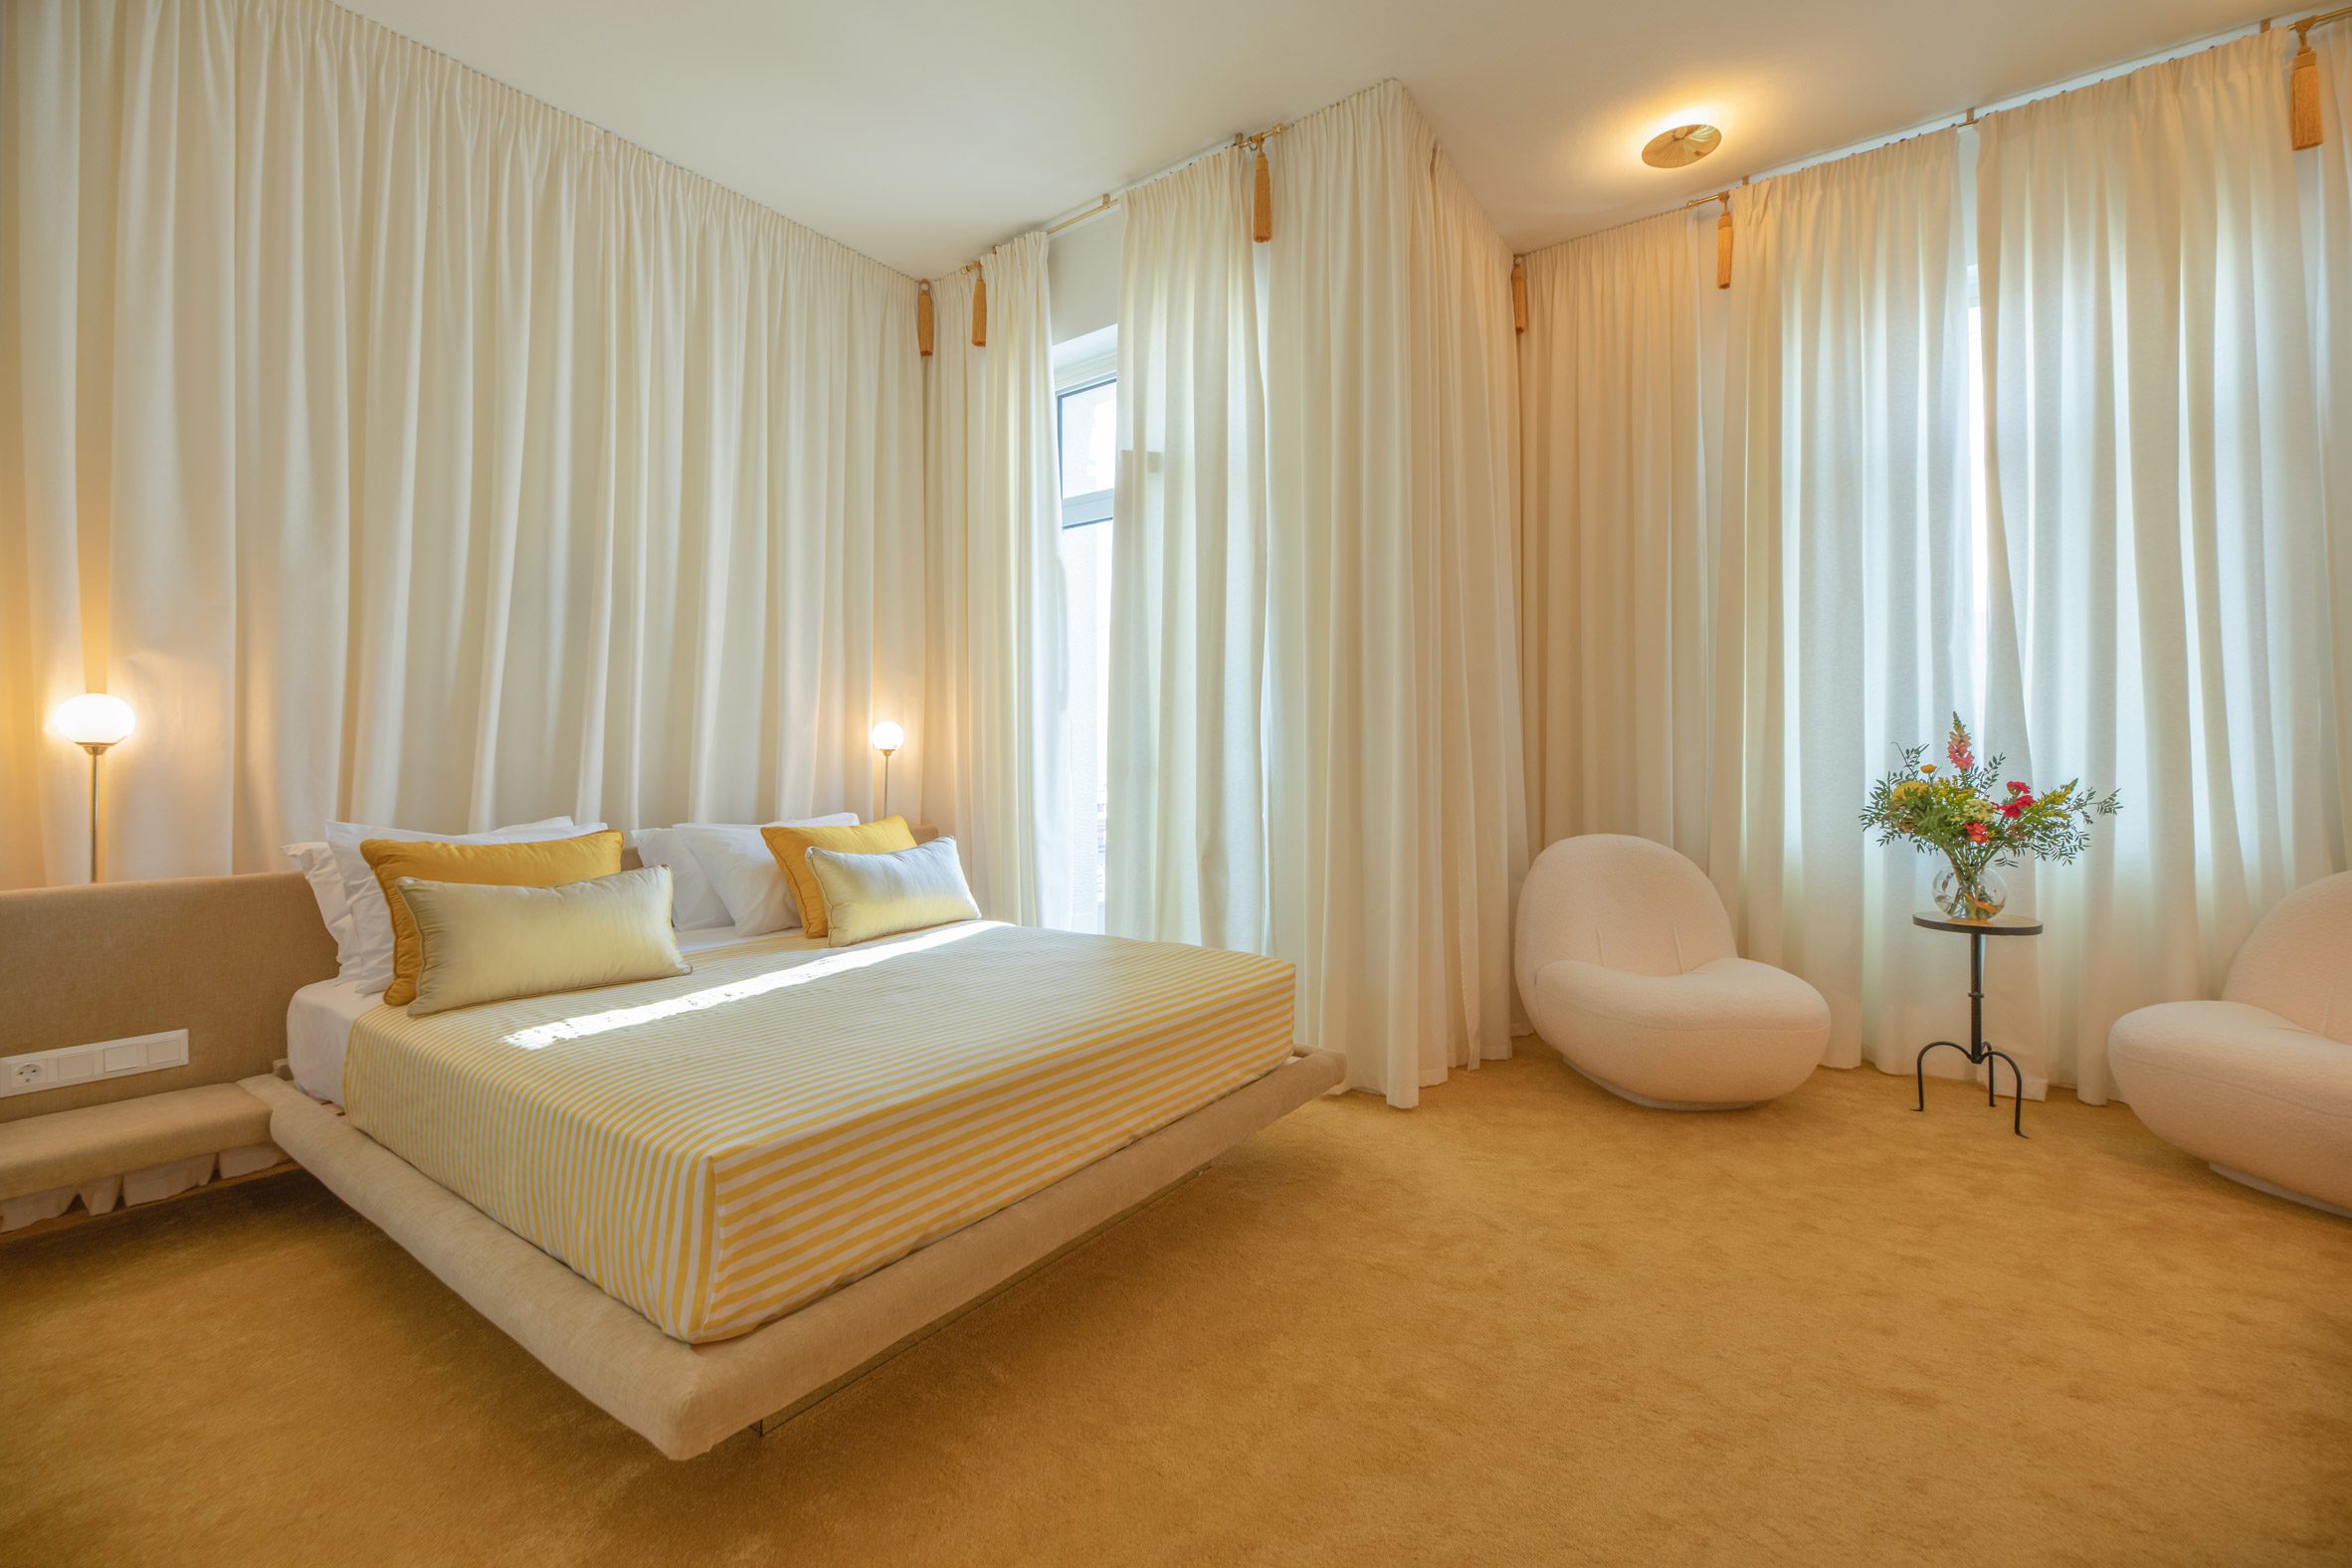 Guest room of Apollo Palm hotel with floor-to-ceiling curtains